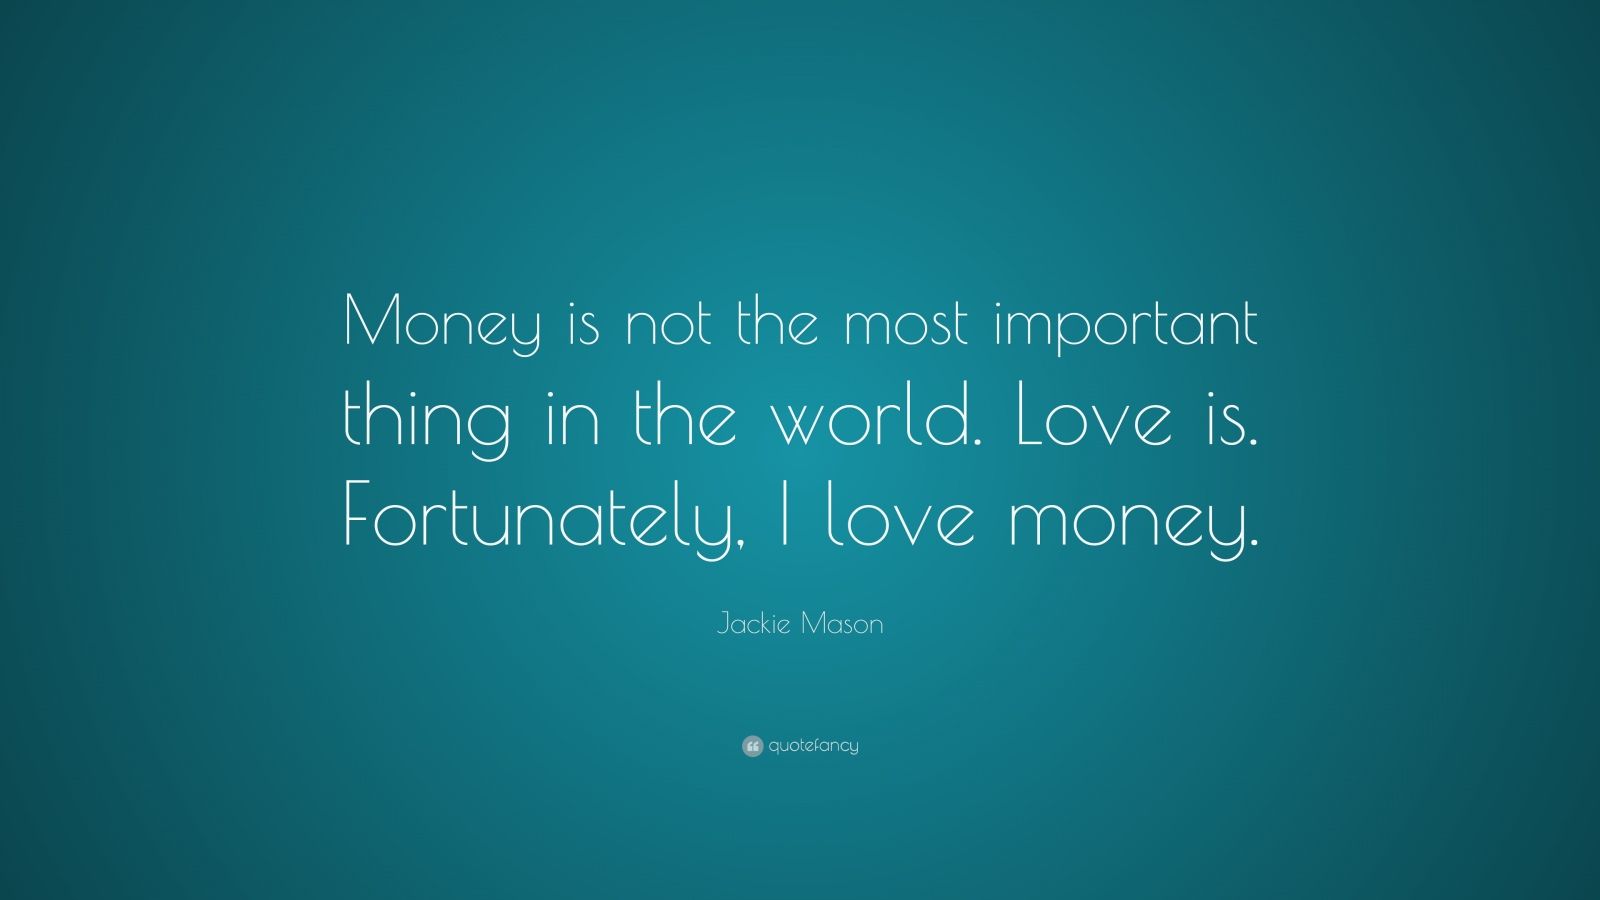 Money is not the most important